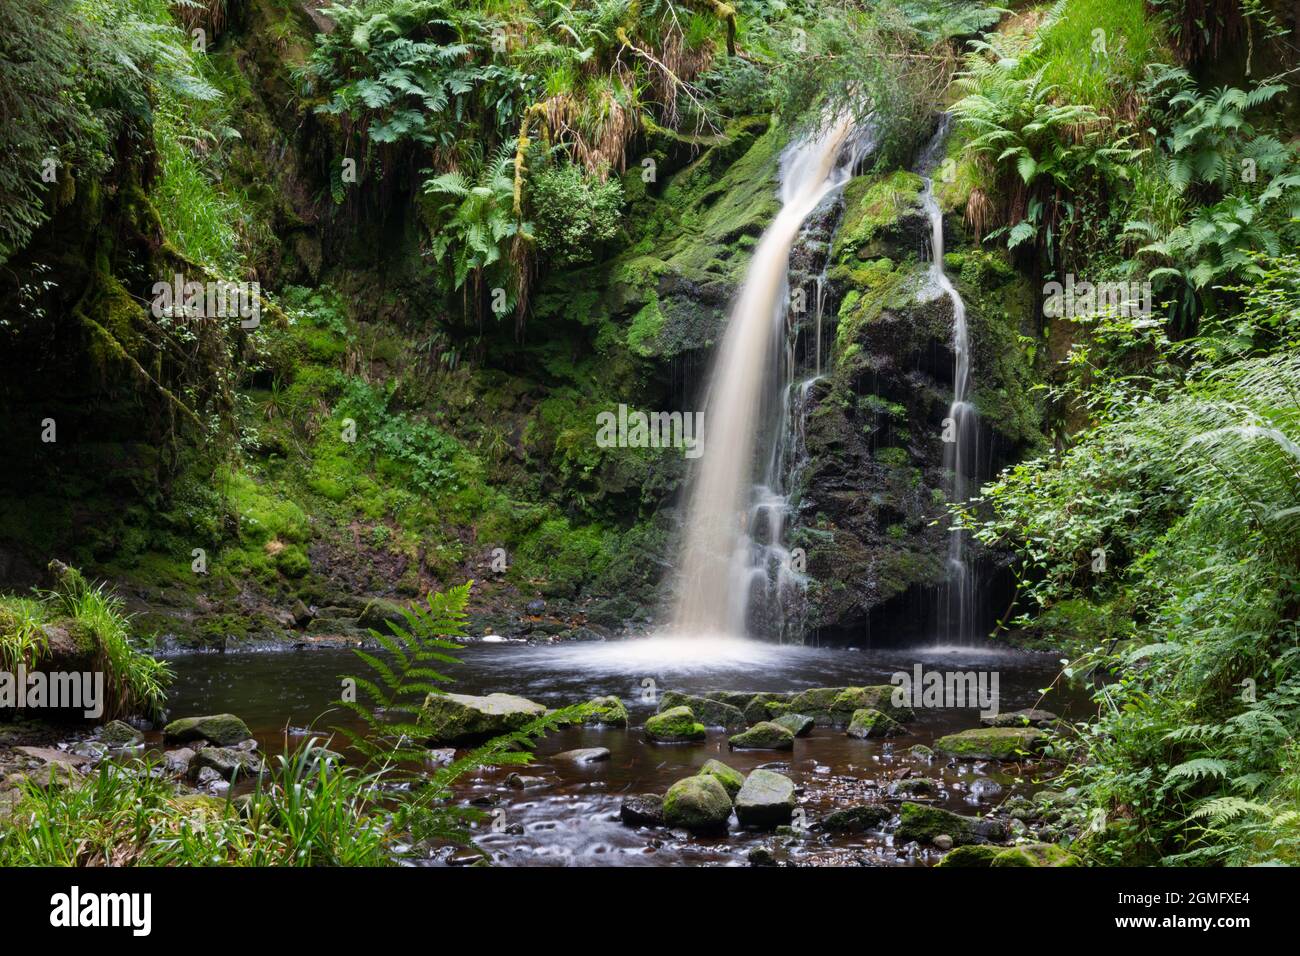 Hindhope Linn waterfall, Kielder Forest Park, Northumberland in summer time, a beautiful waterfall in a secluded forested valley. Stock Photo